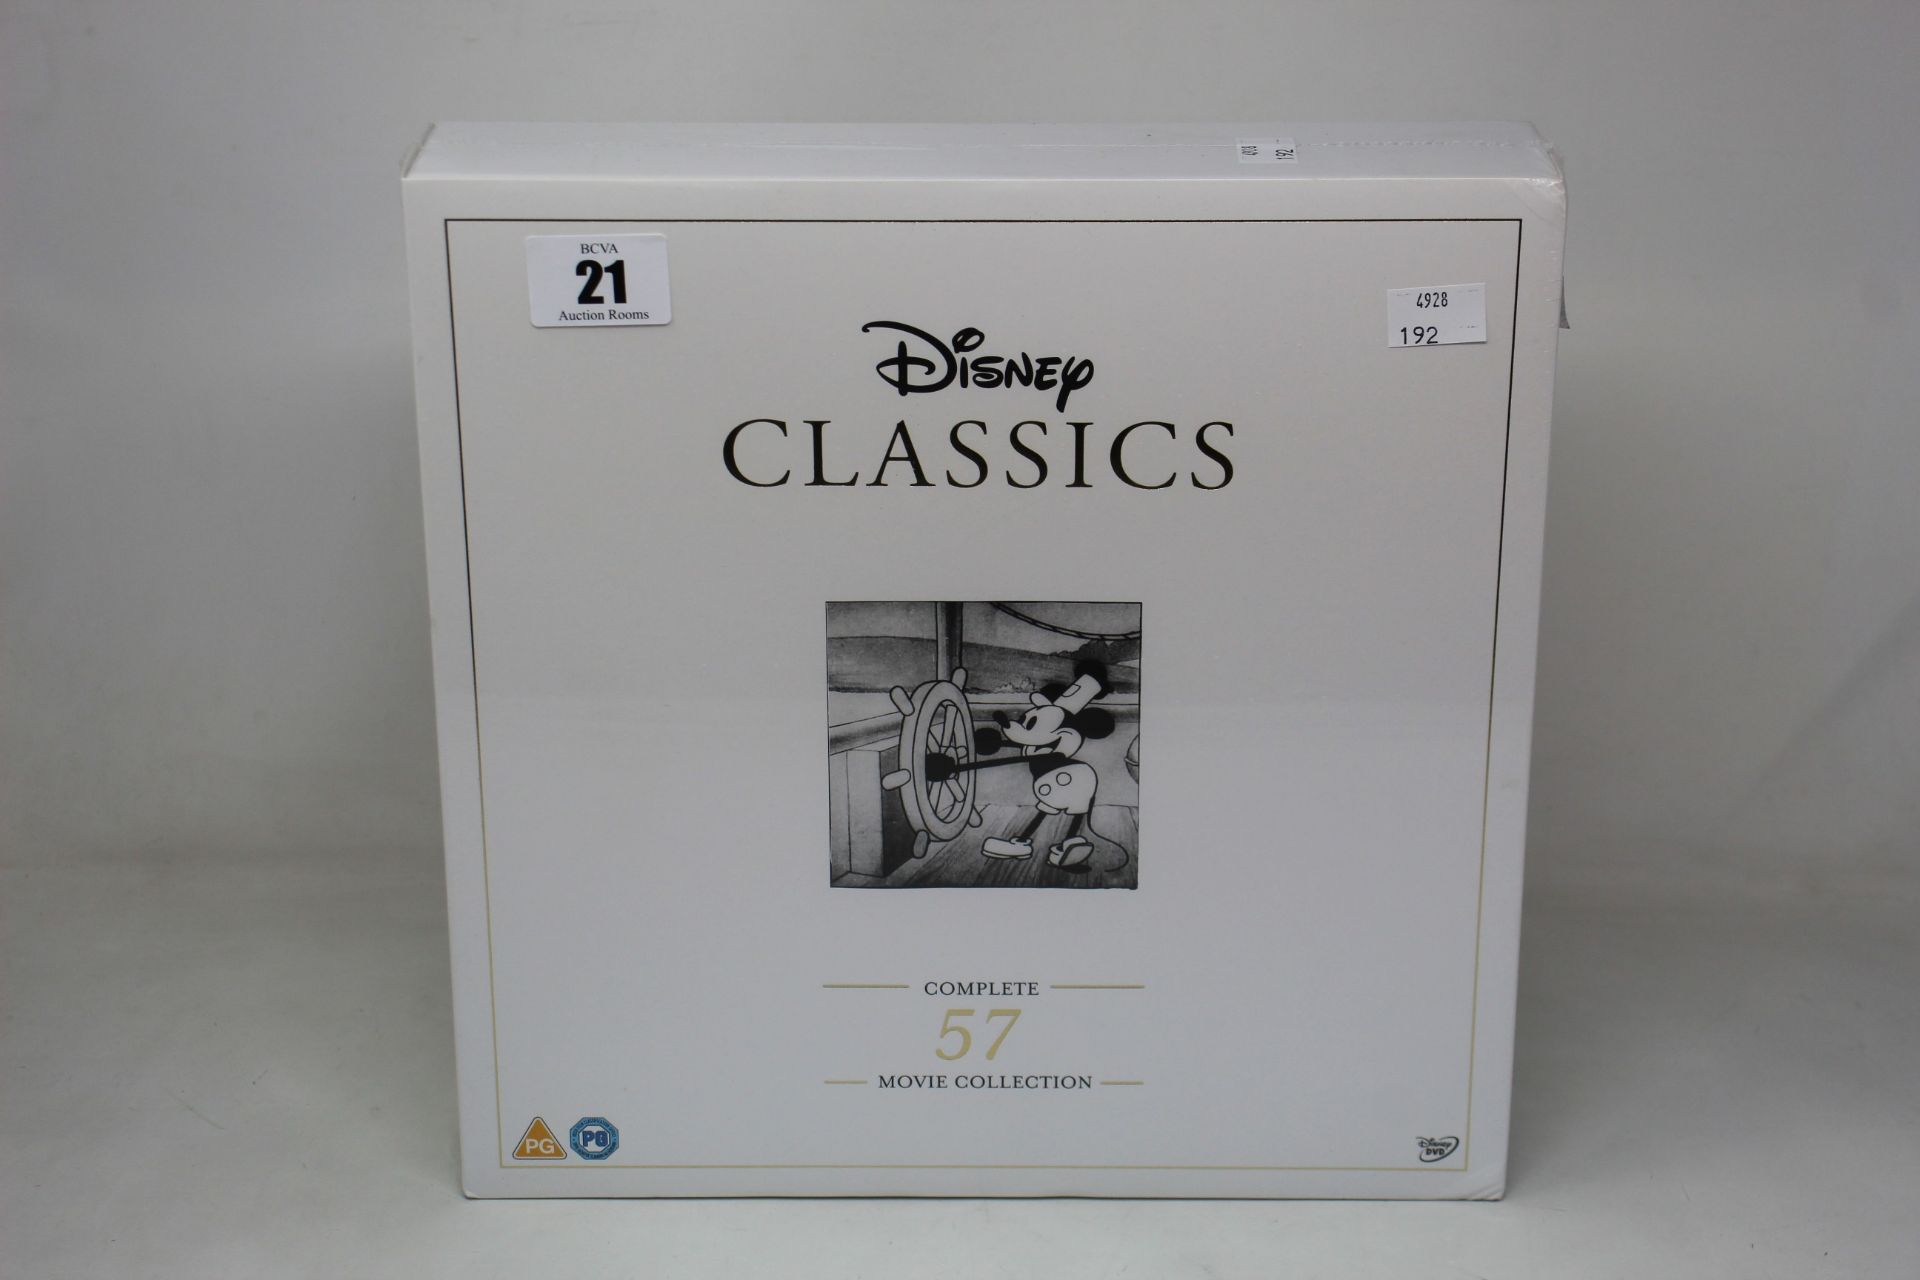 A sealed as new Disney Classics 57 disc complete movie collection box set.